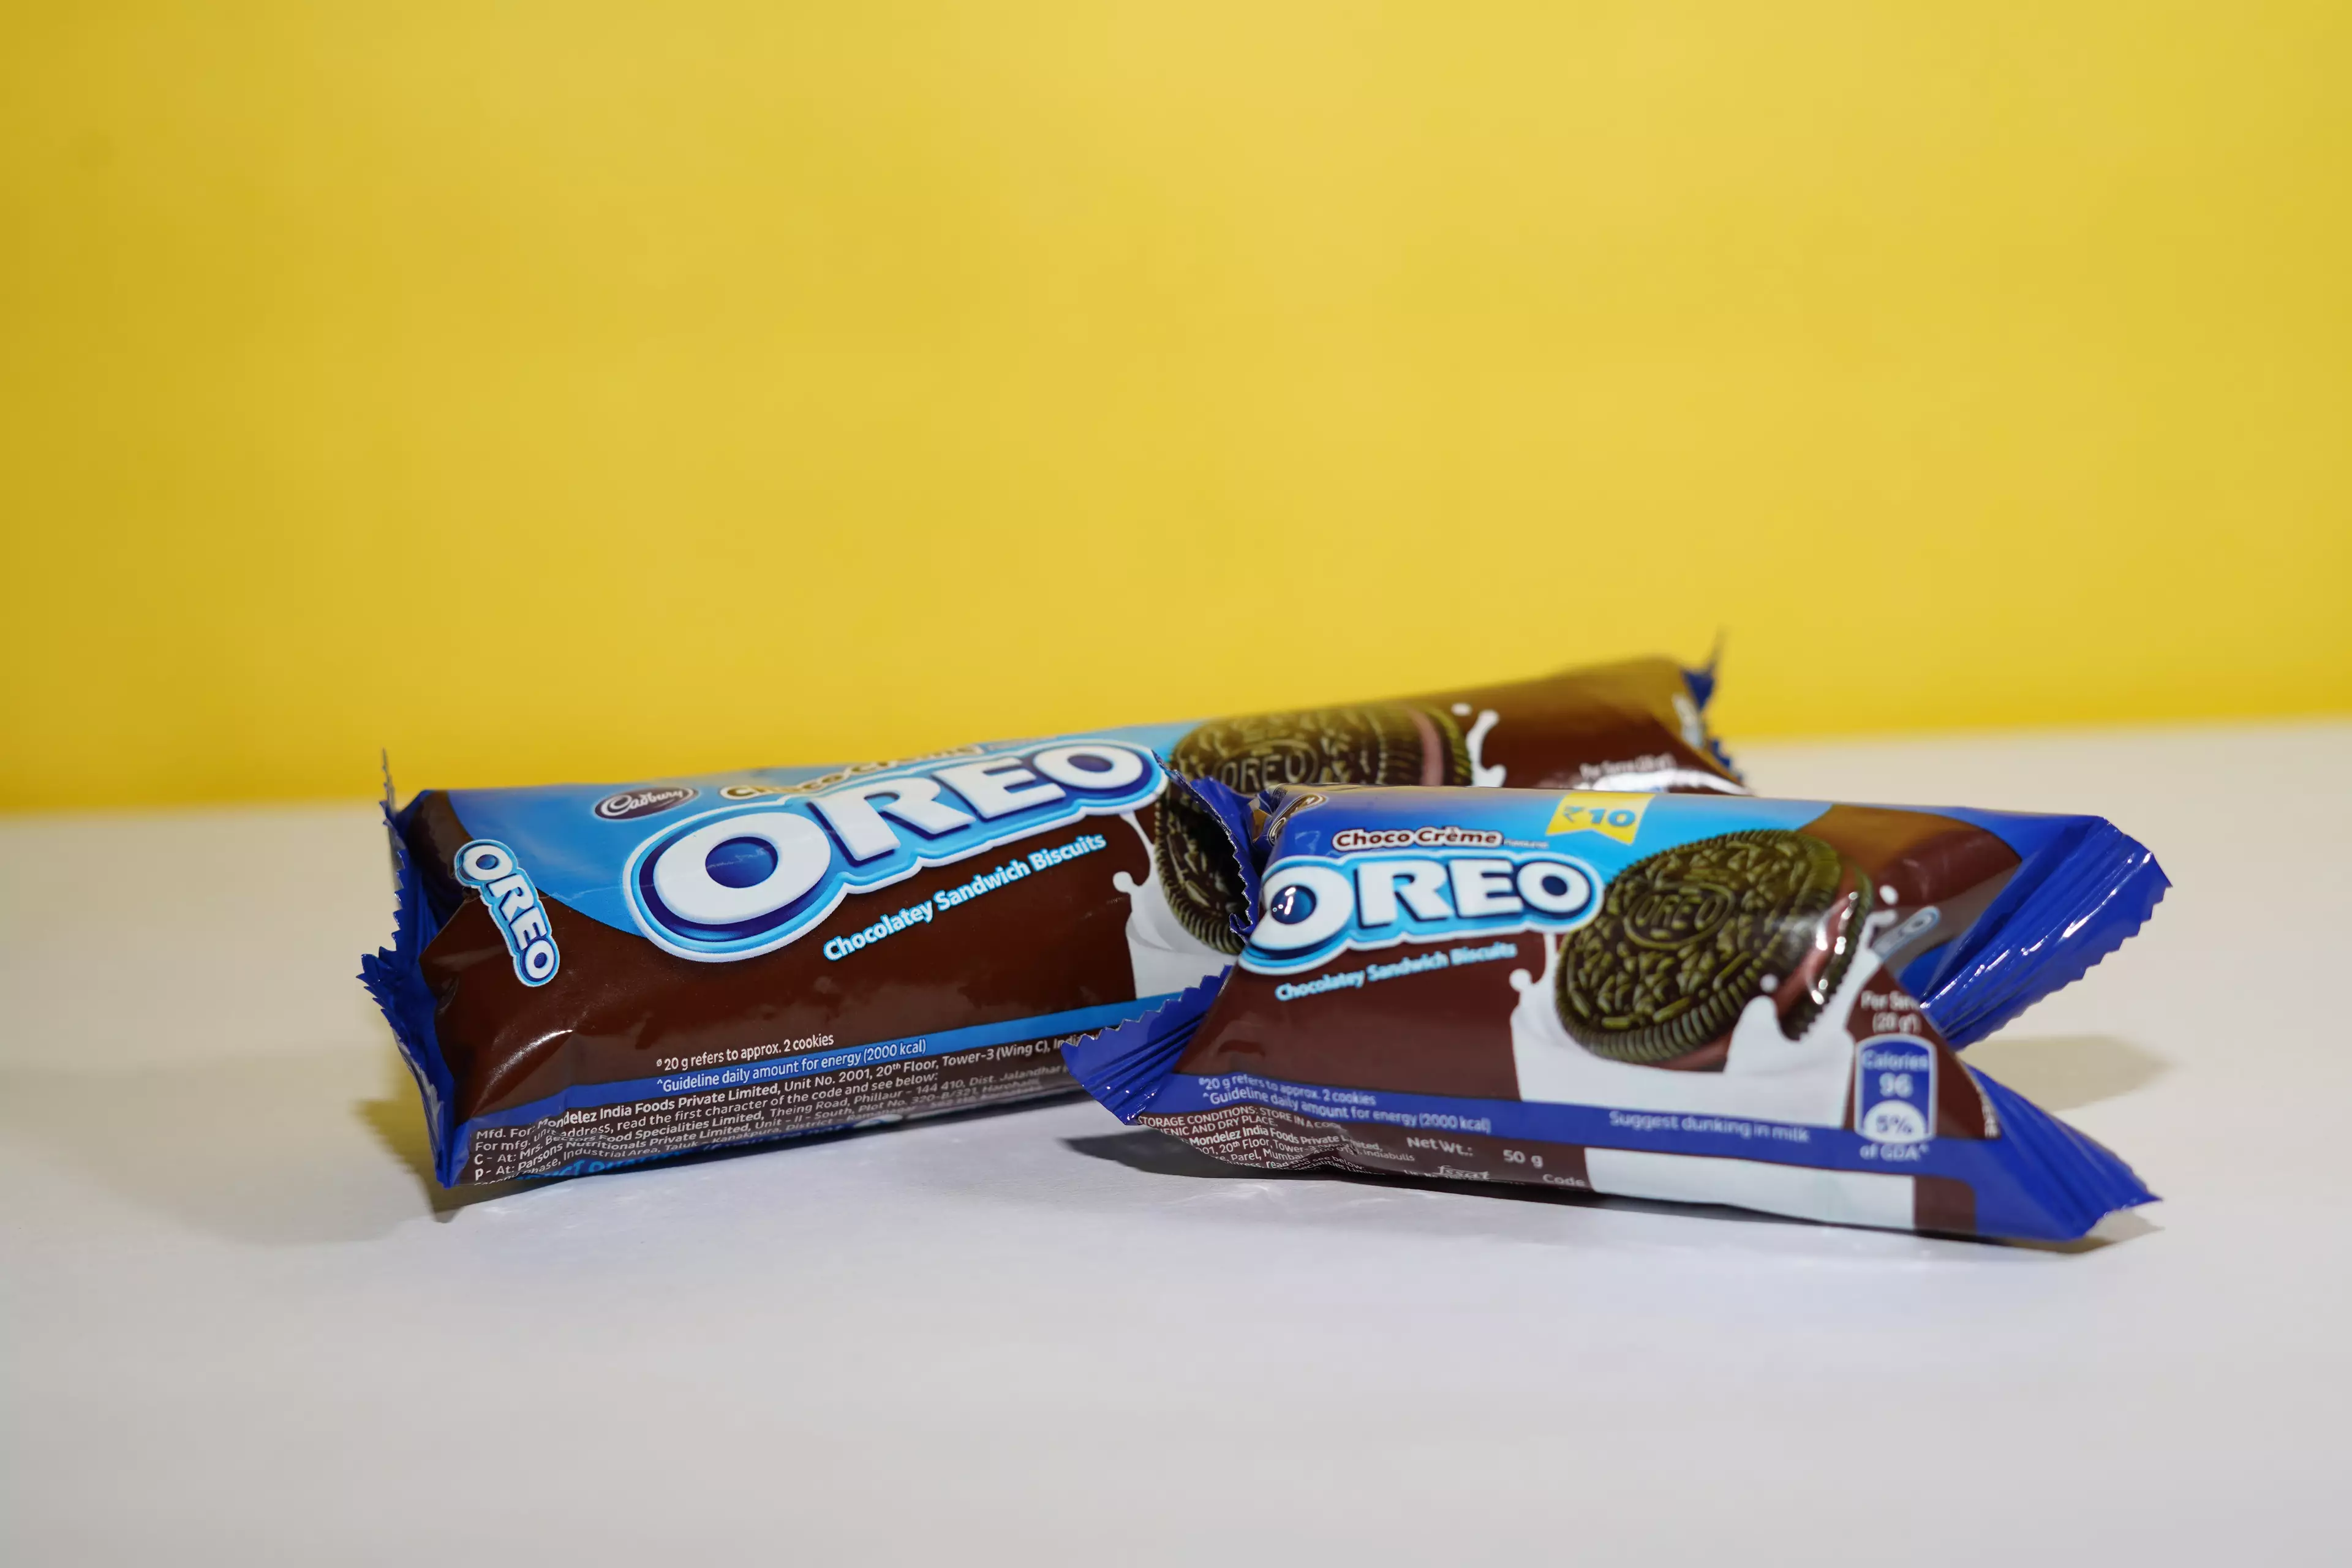 The new flavour is the latest addition to the Oreo doughnut range (